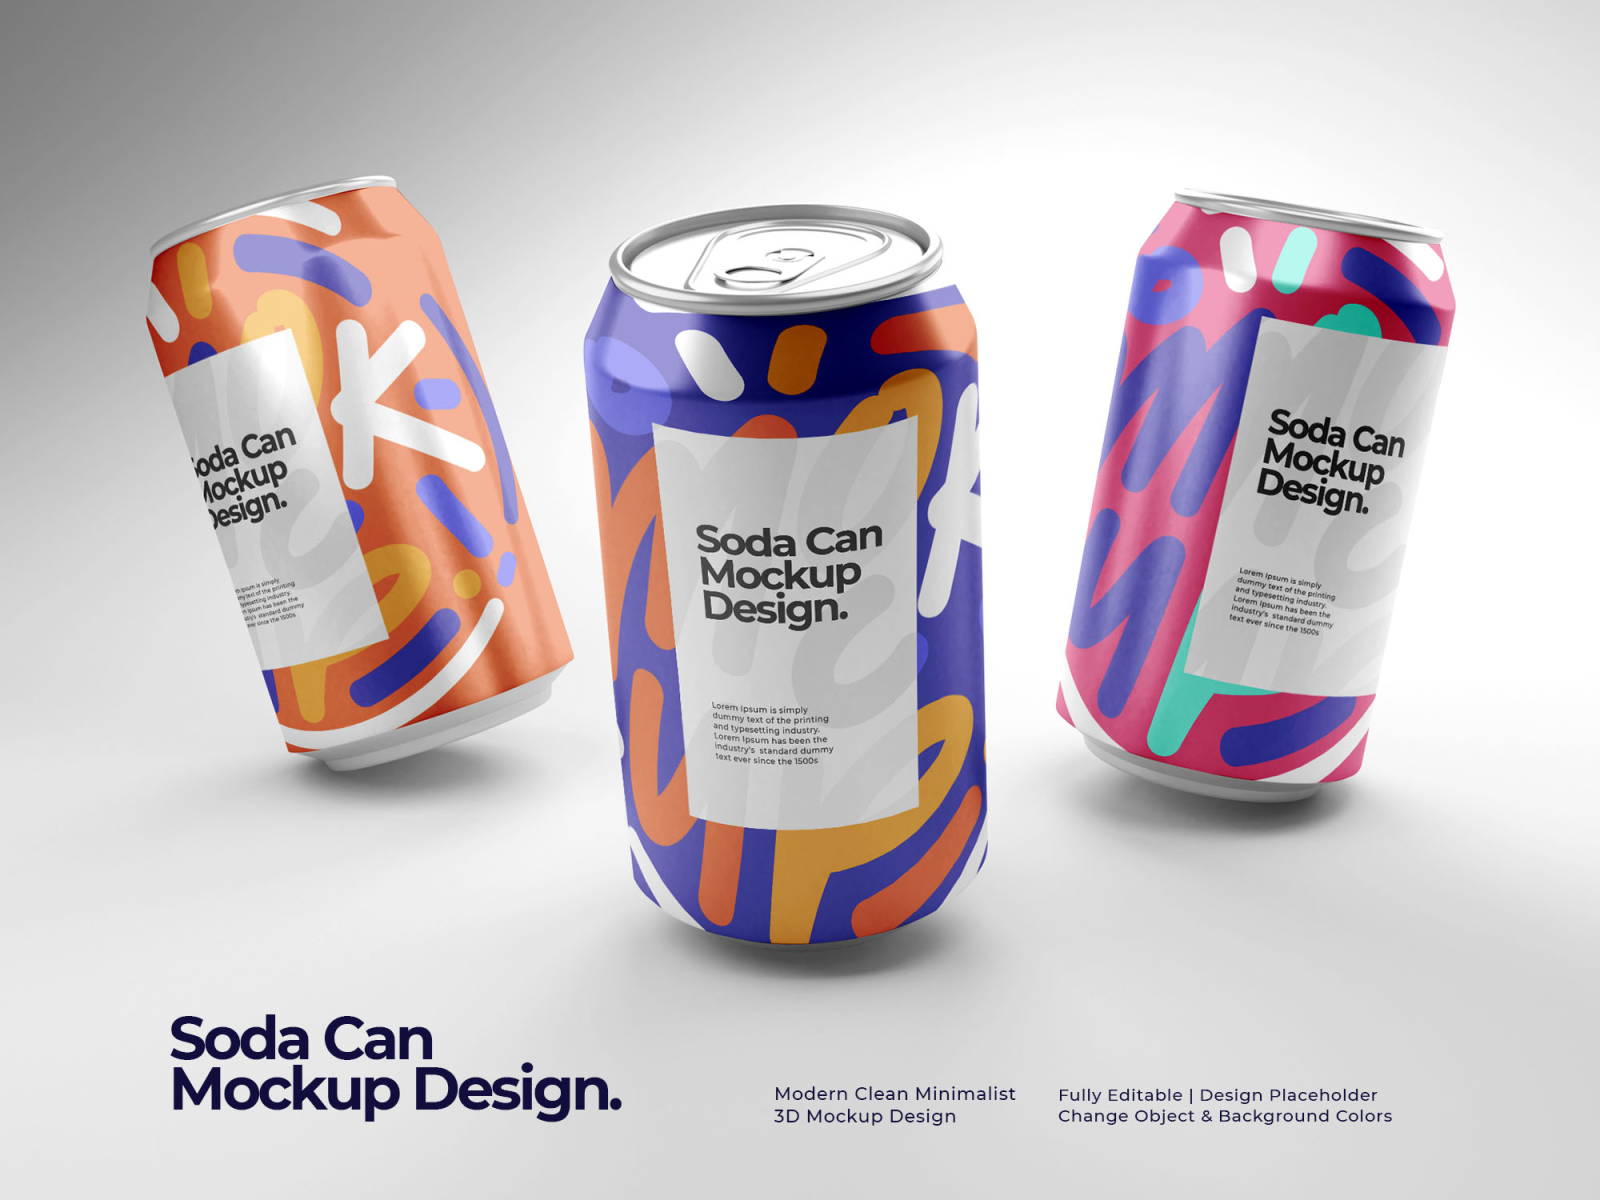 Download Soda Can Mockup Design By Fisual 3d Vactory On Dribbble PSD Mockup Templates